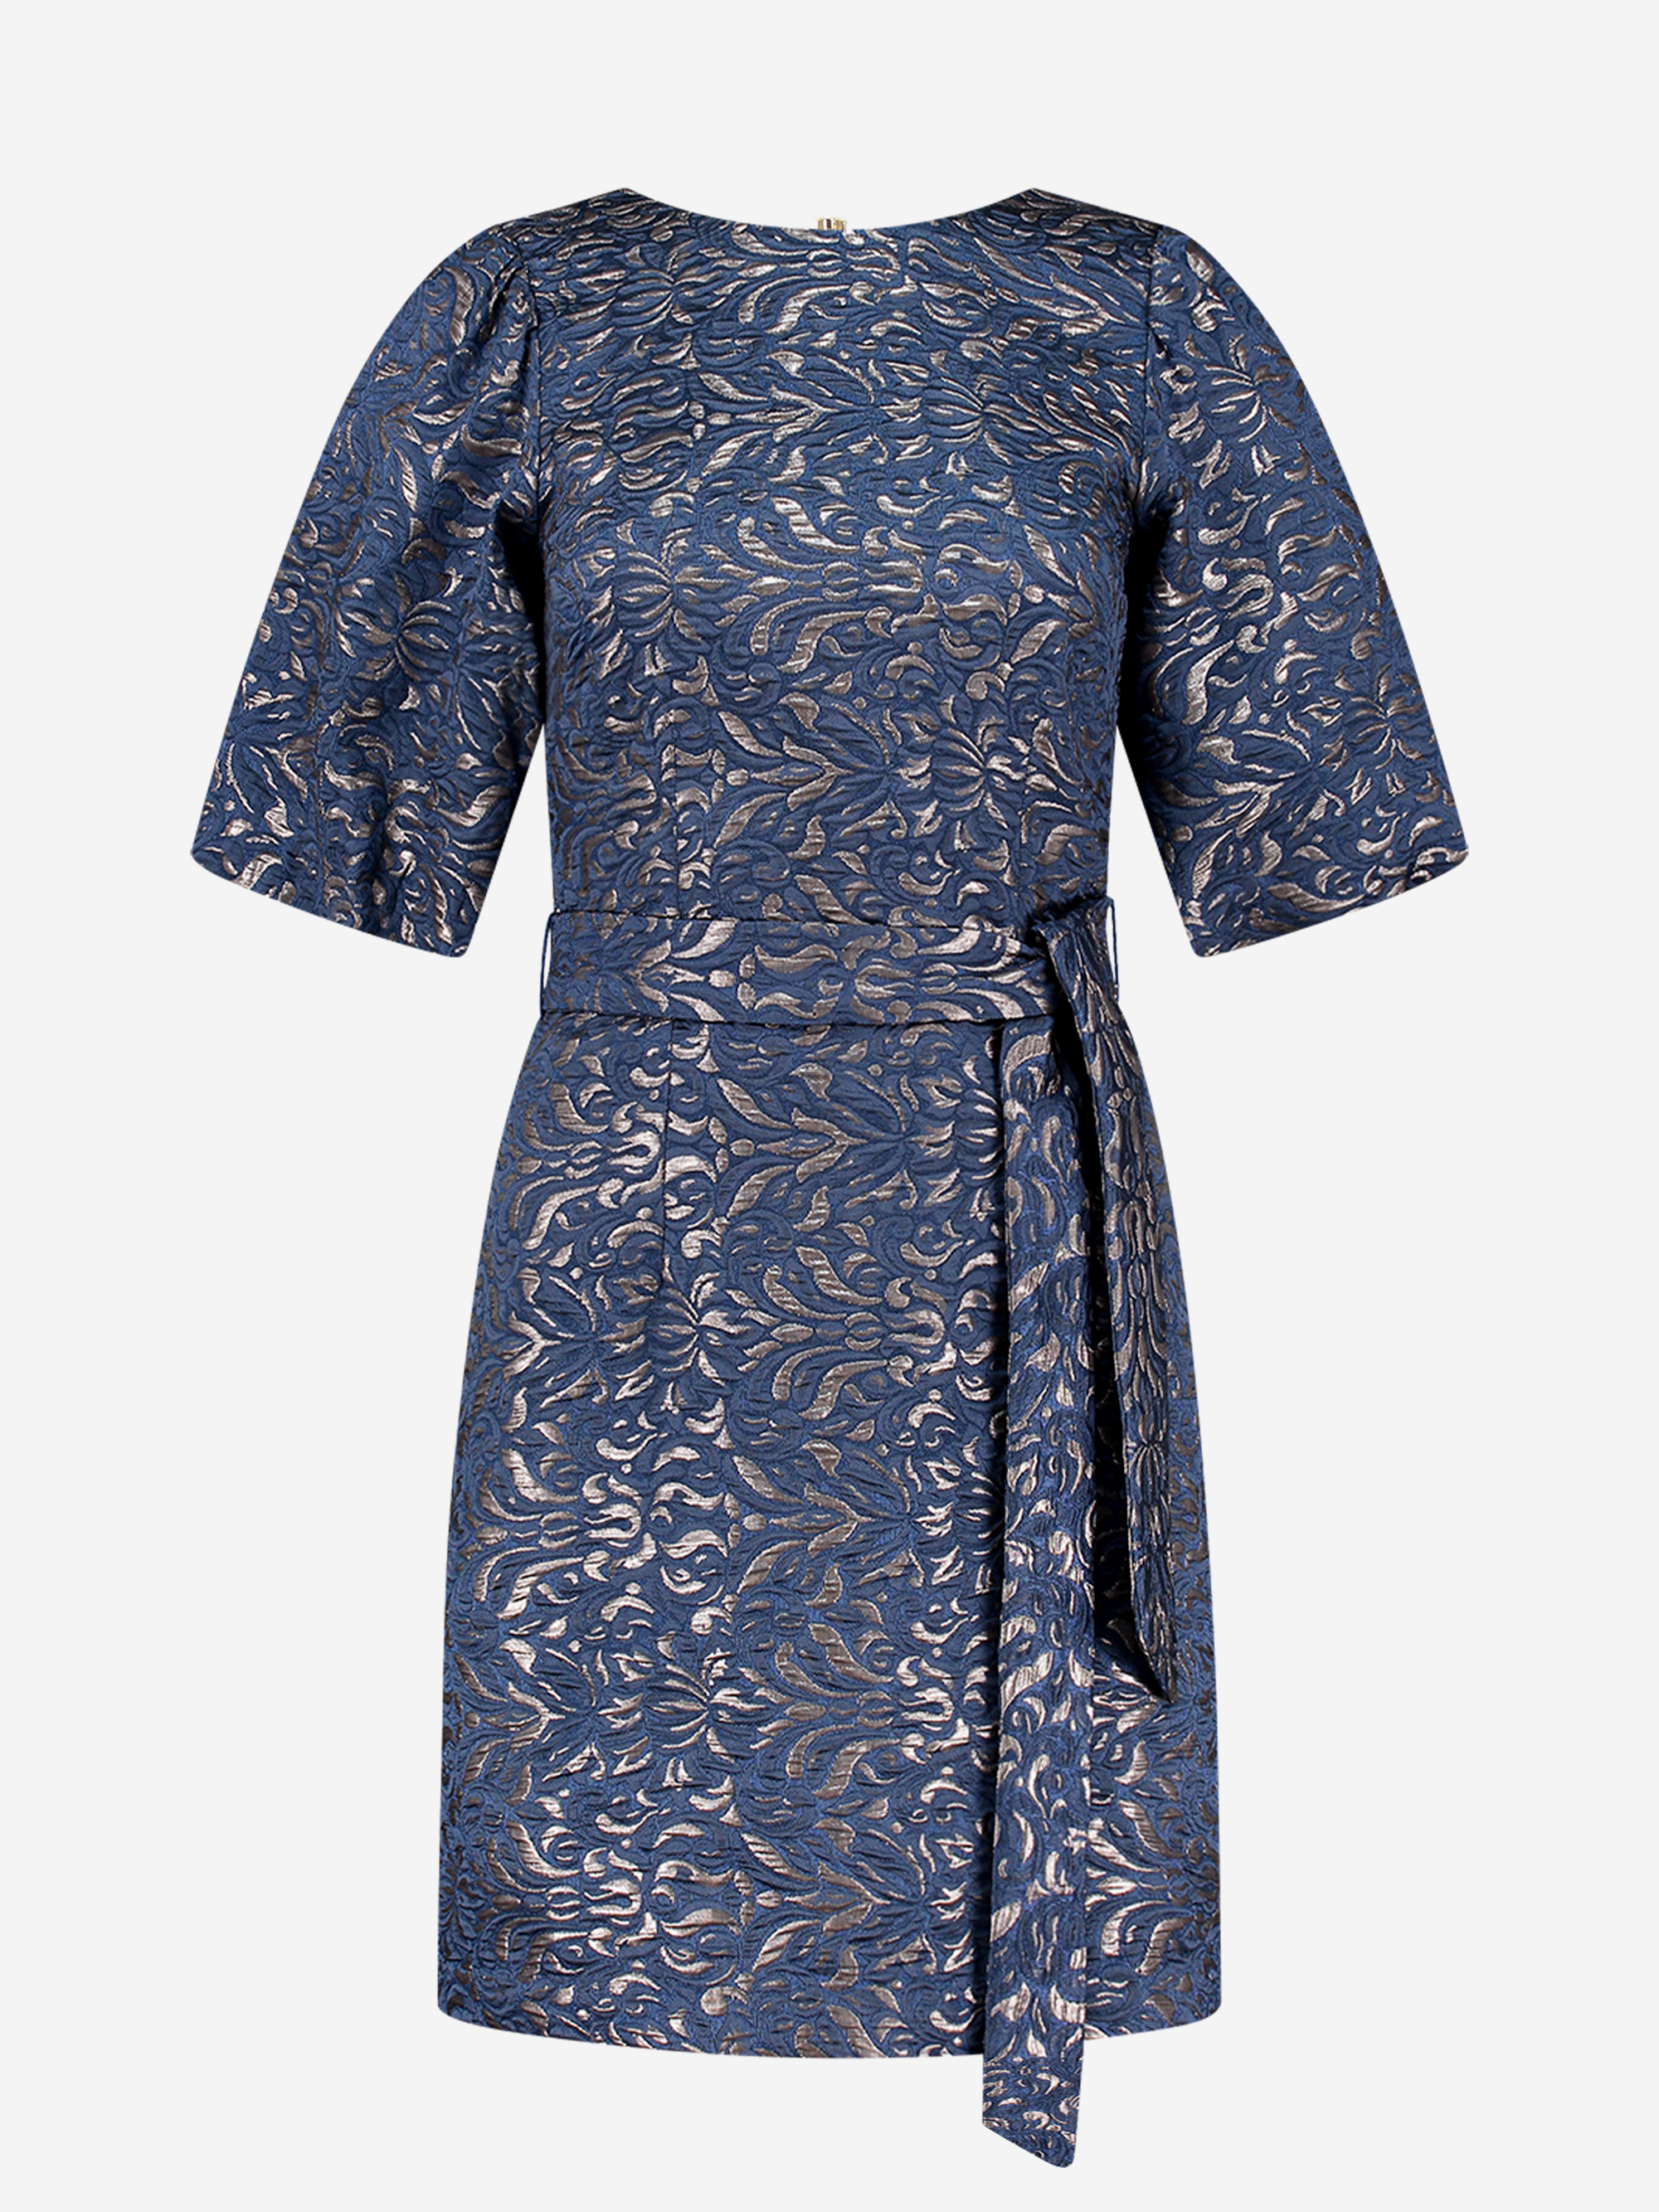 Jacquard woven dress with tie belt